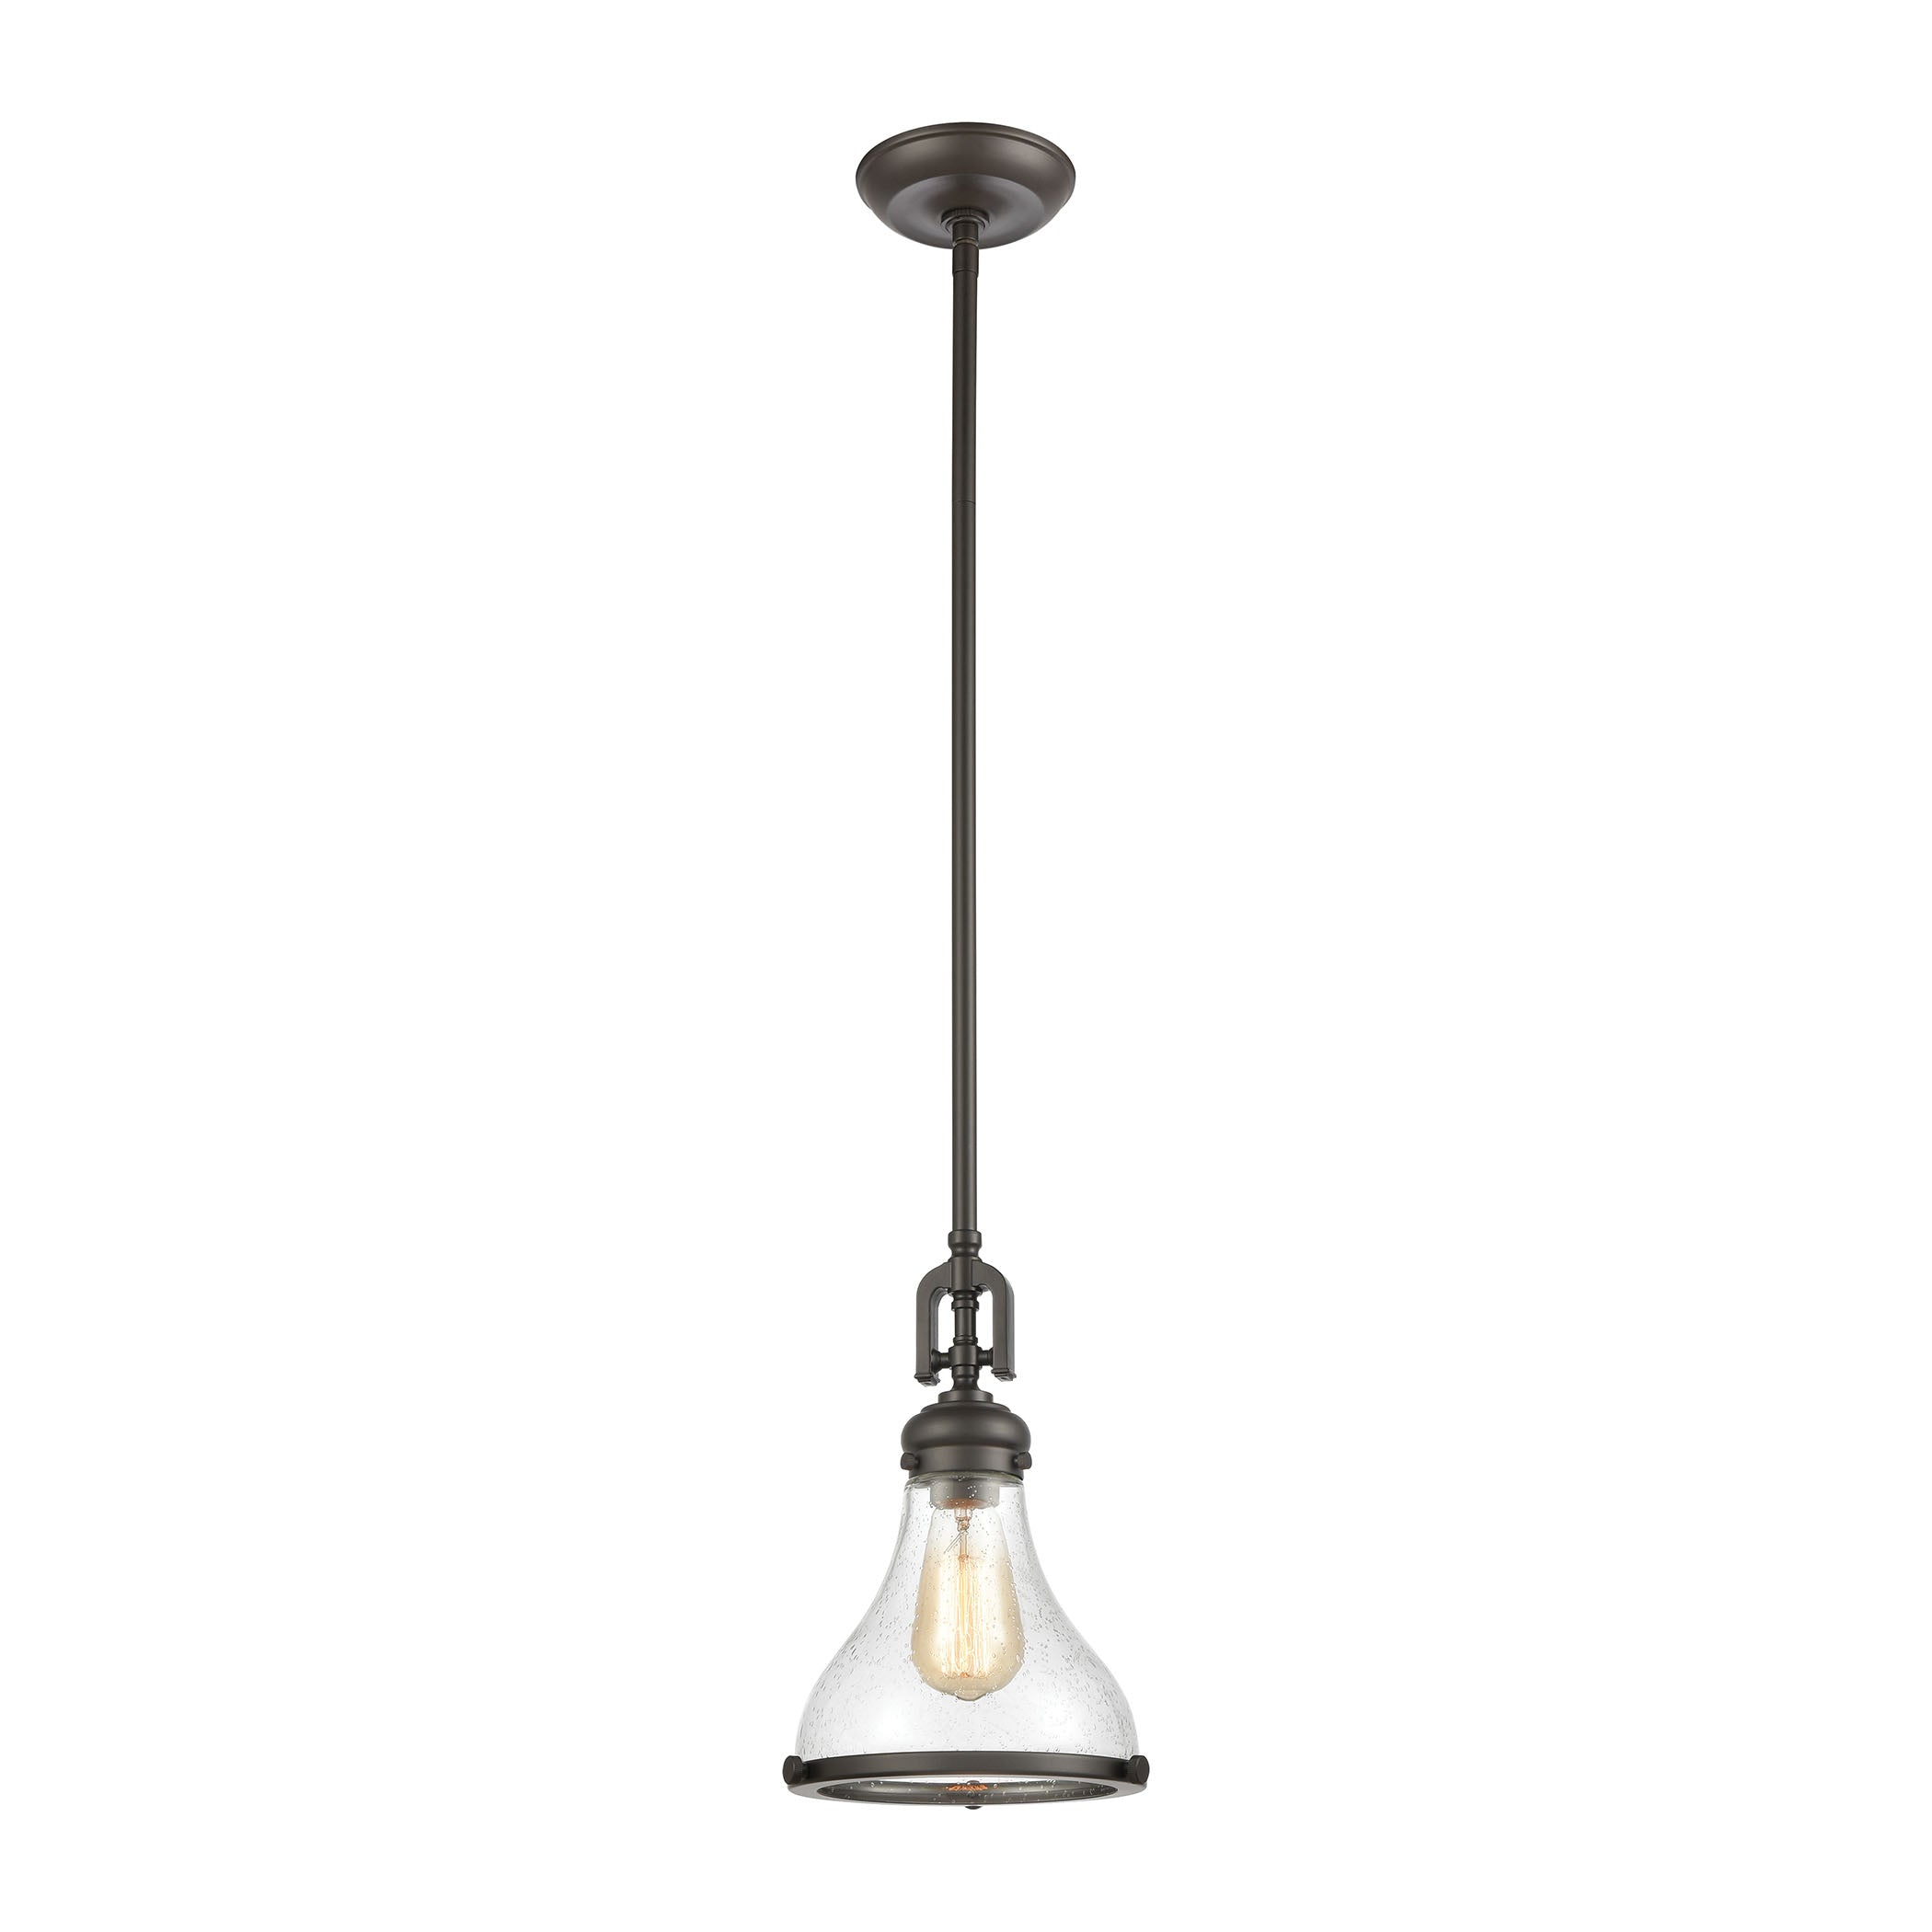 ELK Lighting 57360/1 Rutherford 1-Light Mini Pendant in Oil Rubbed Bronze with Seedy Glass